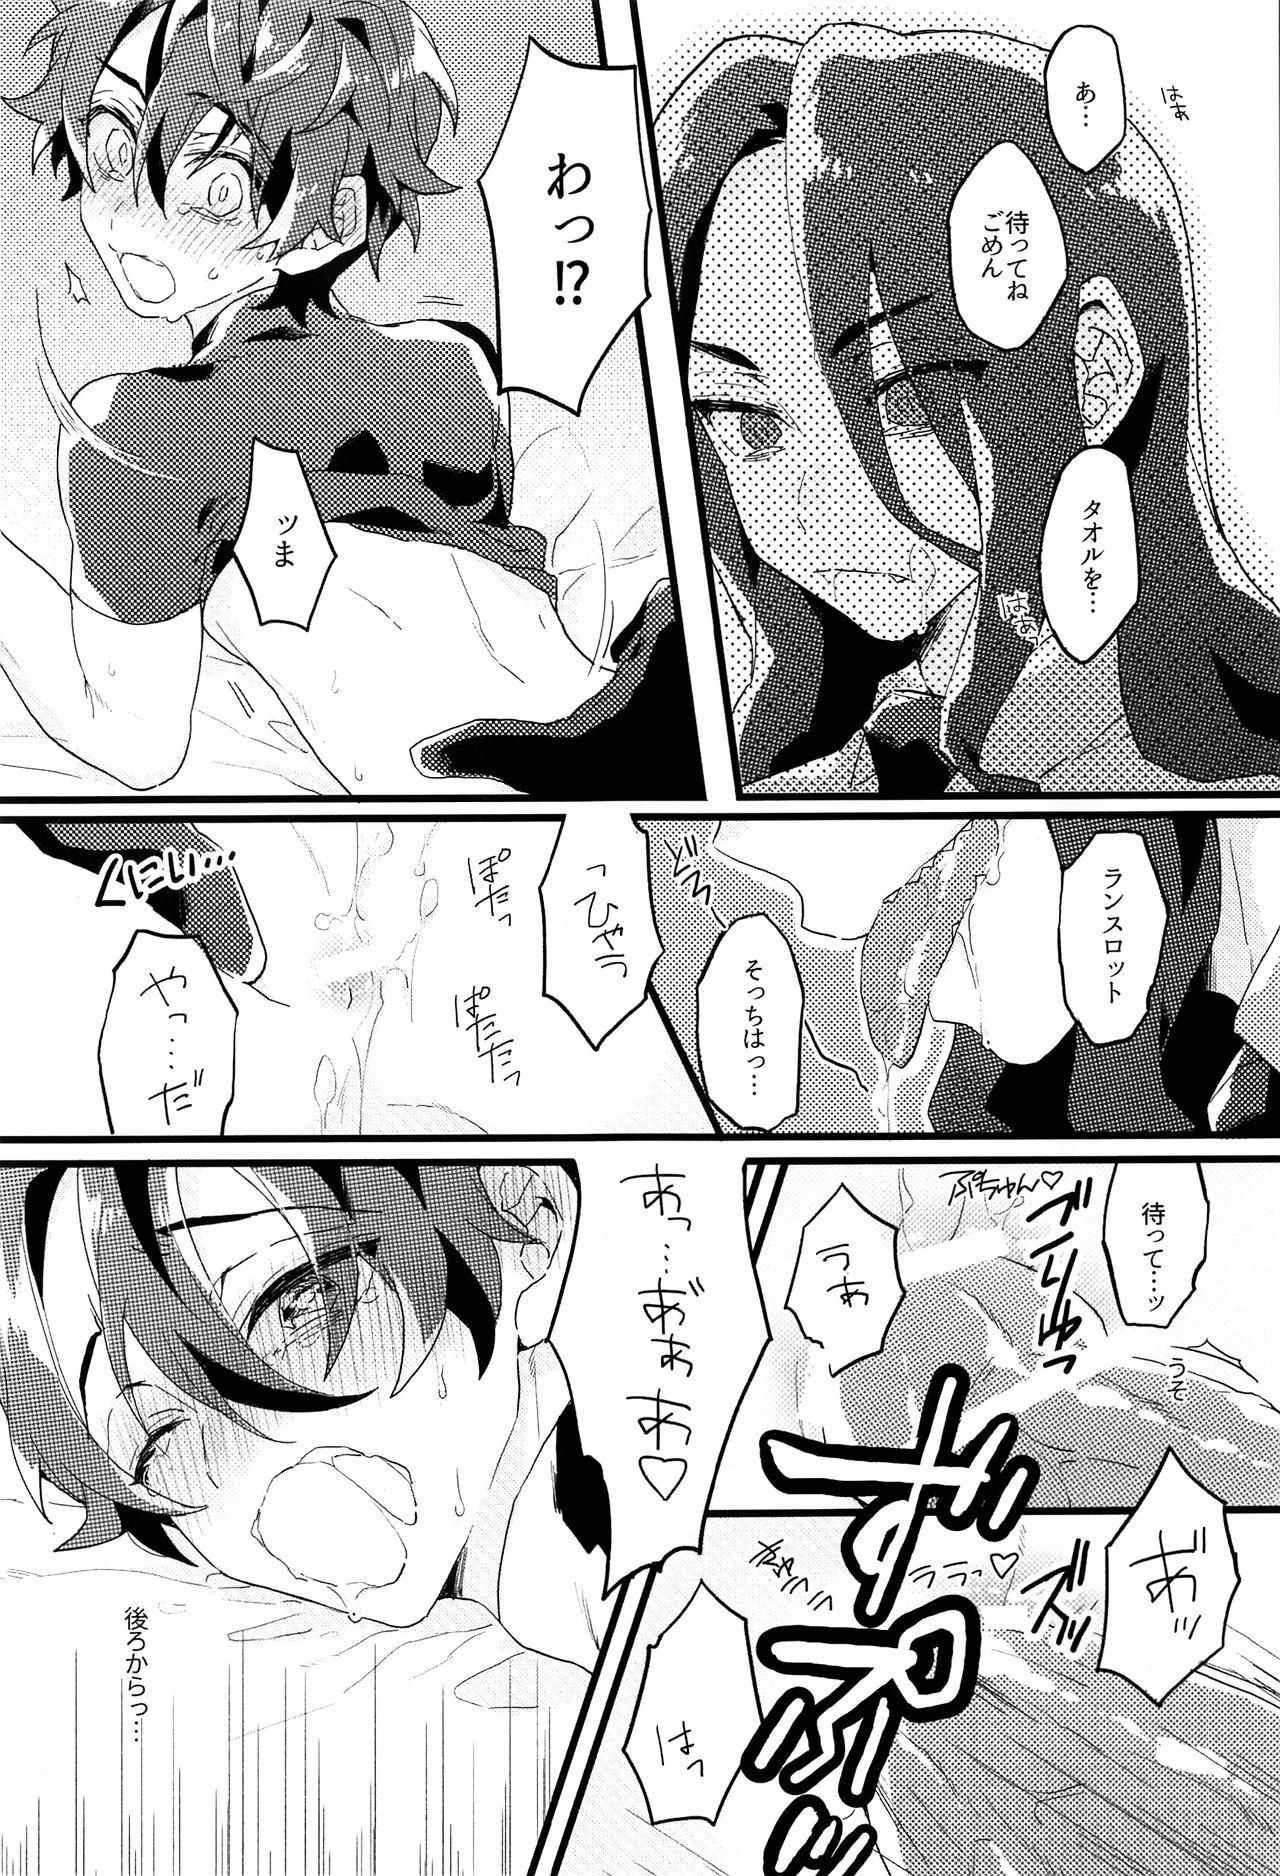 Public Nudity hungry sharp chune - Fate grand order Wanking - Page 5